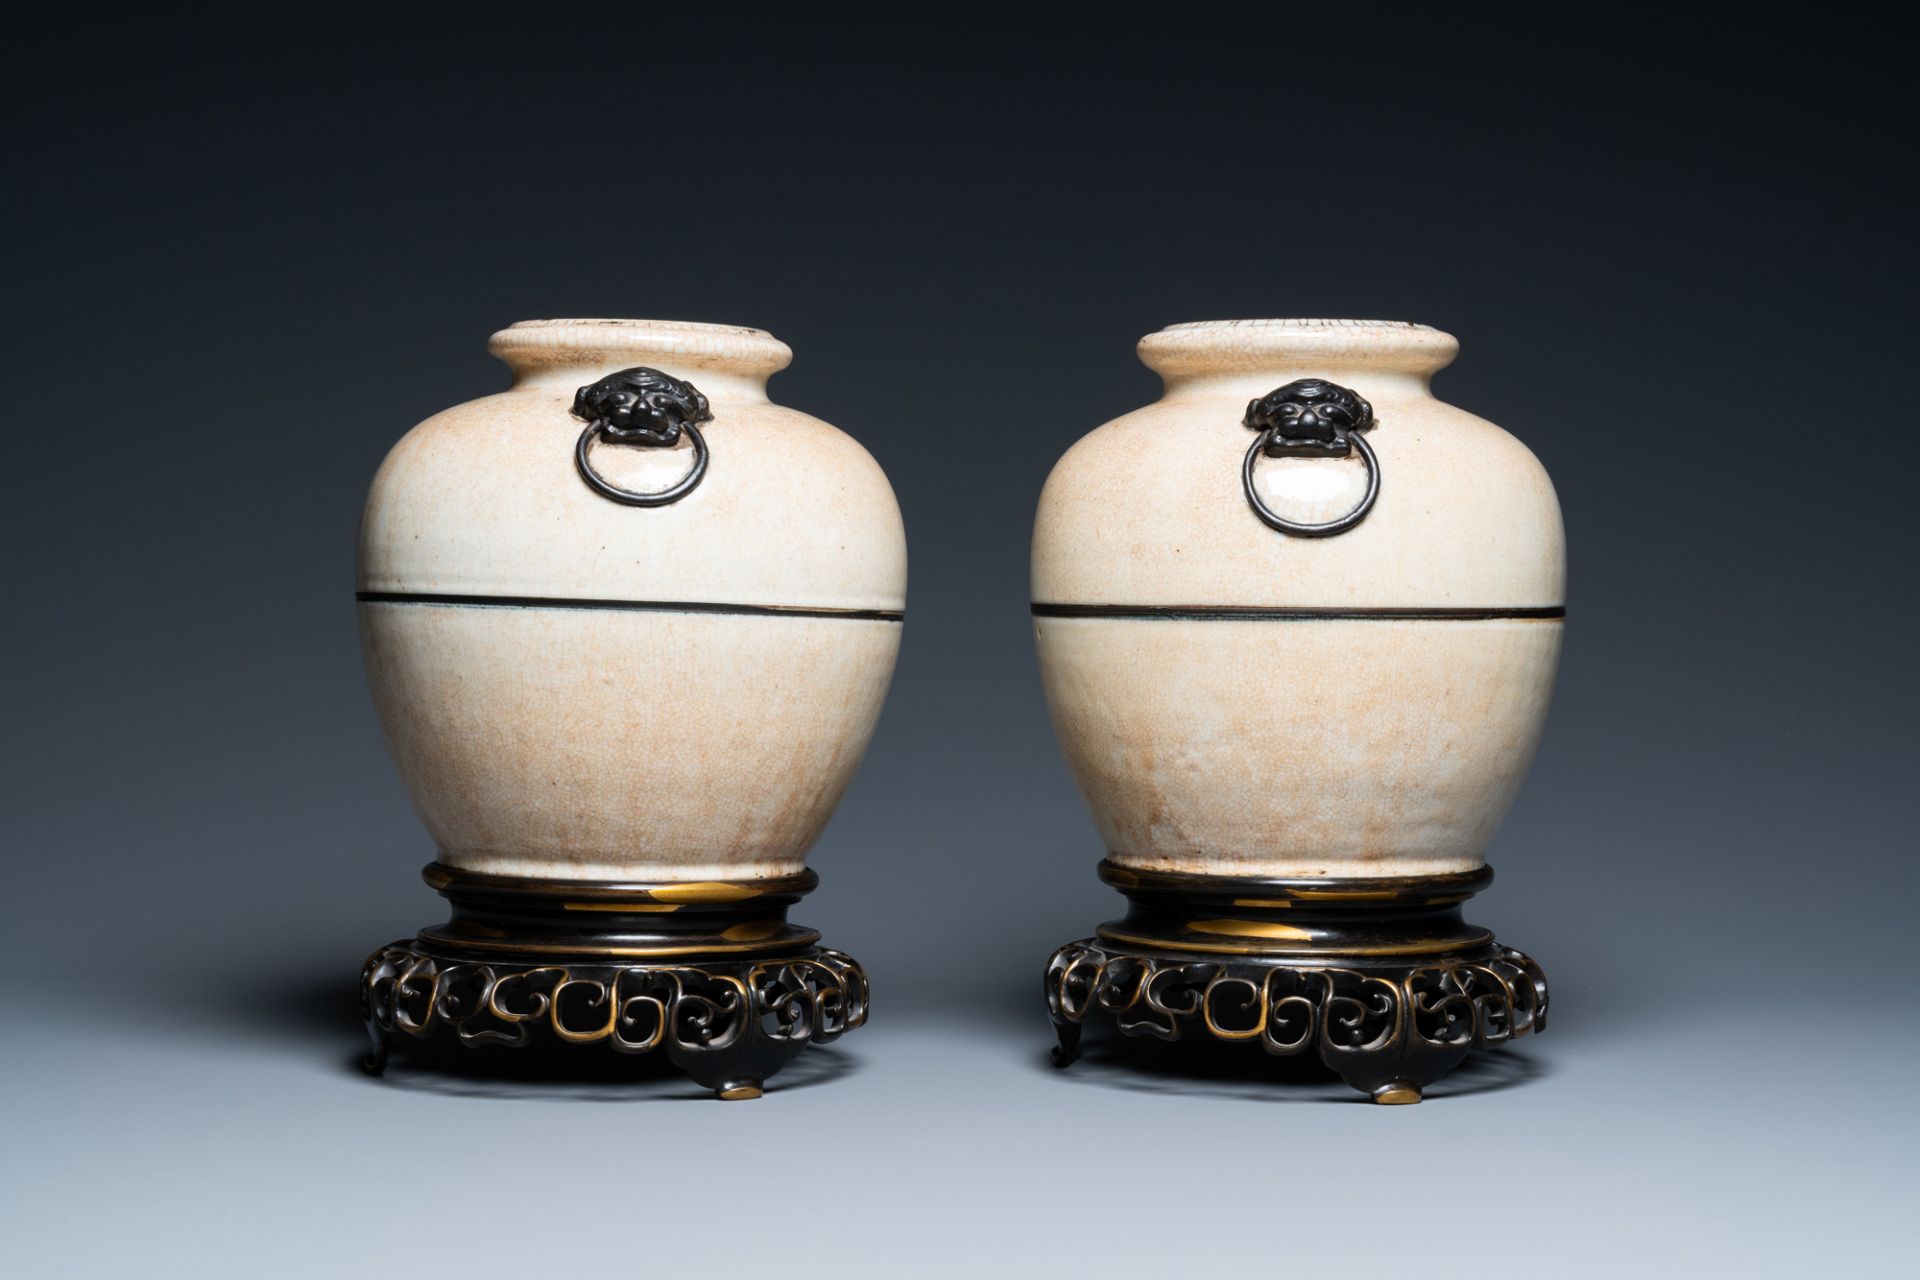 A pair of Chinese monochrome Nanking crackle-glazed vases on reticulated bronze stands, 19th C. - Image 4 of 6